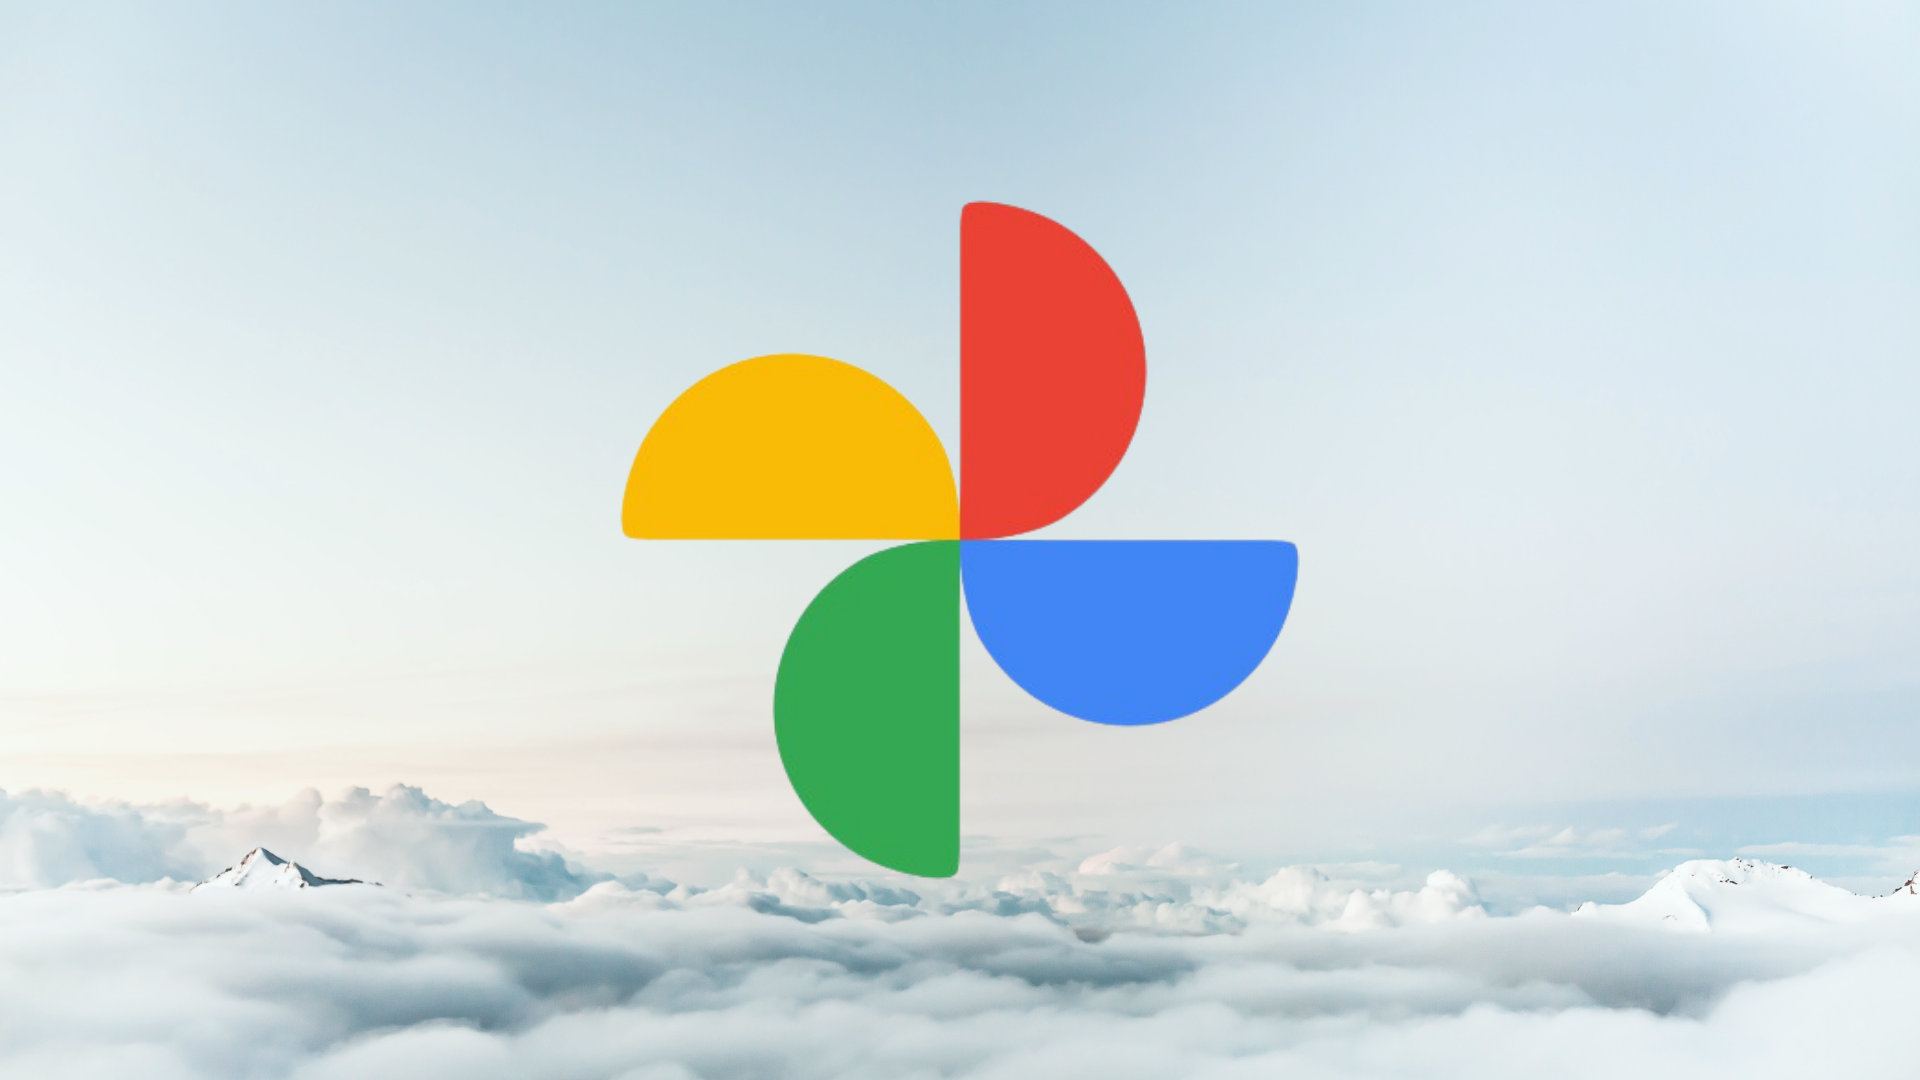 Google Photos Ends Free Unlimited Storage: What You Need to Know